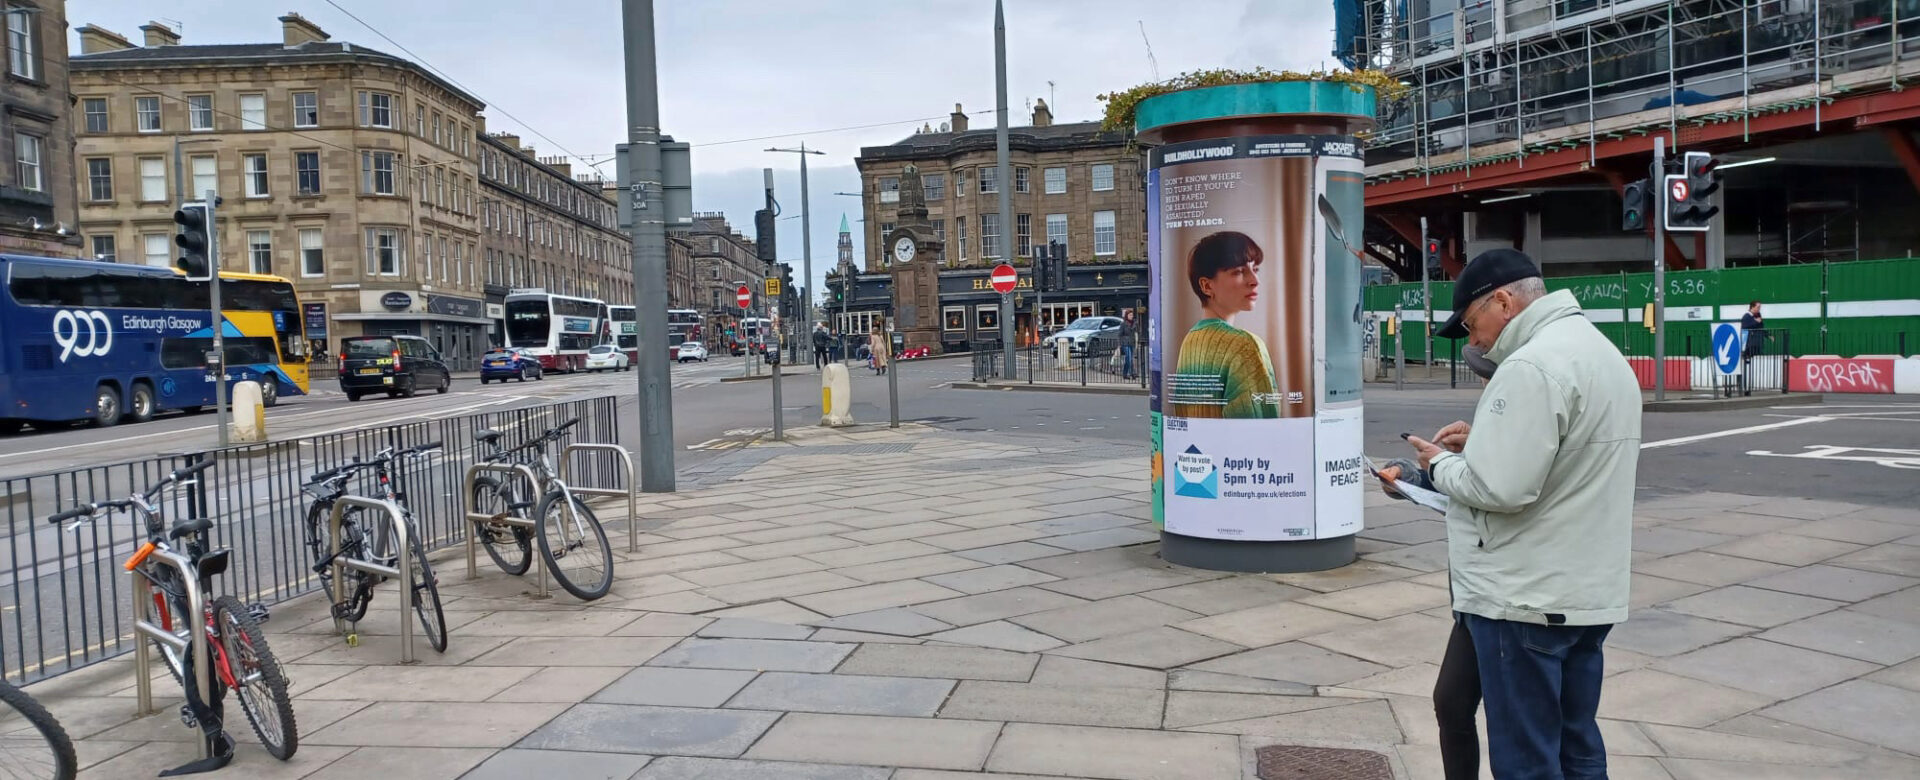 Council self referral 60x40 haymarket. Nb this replaces the festival Square poster